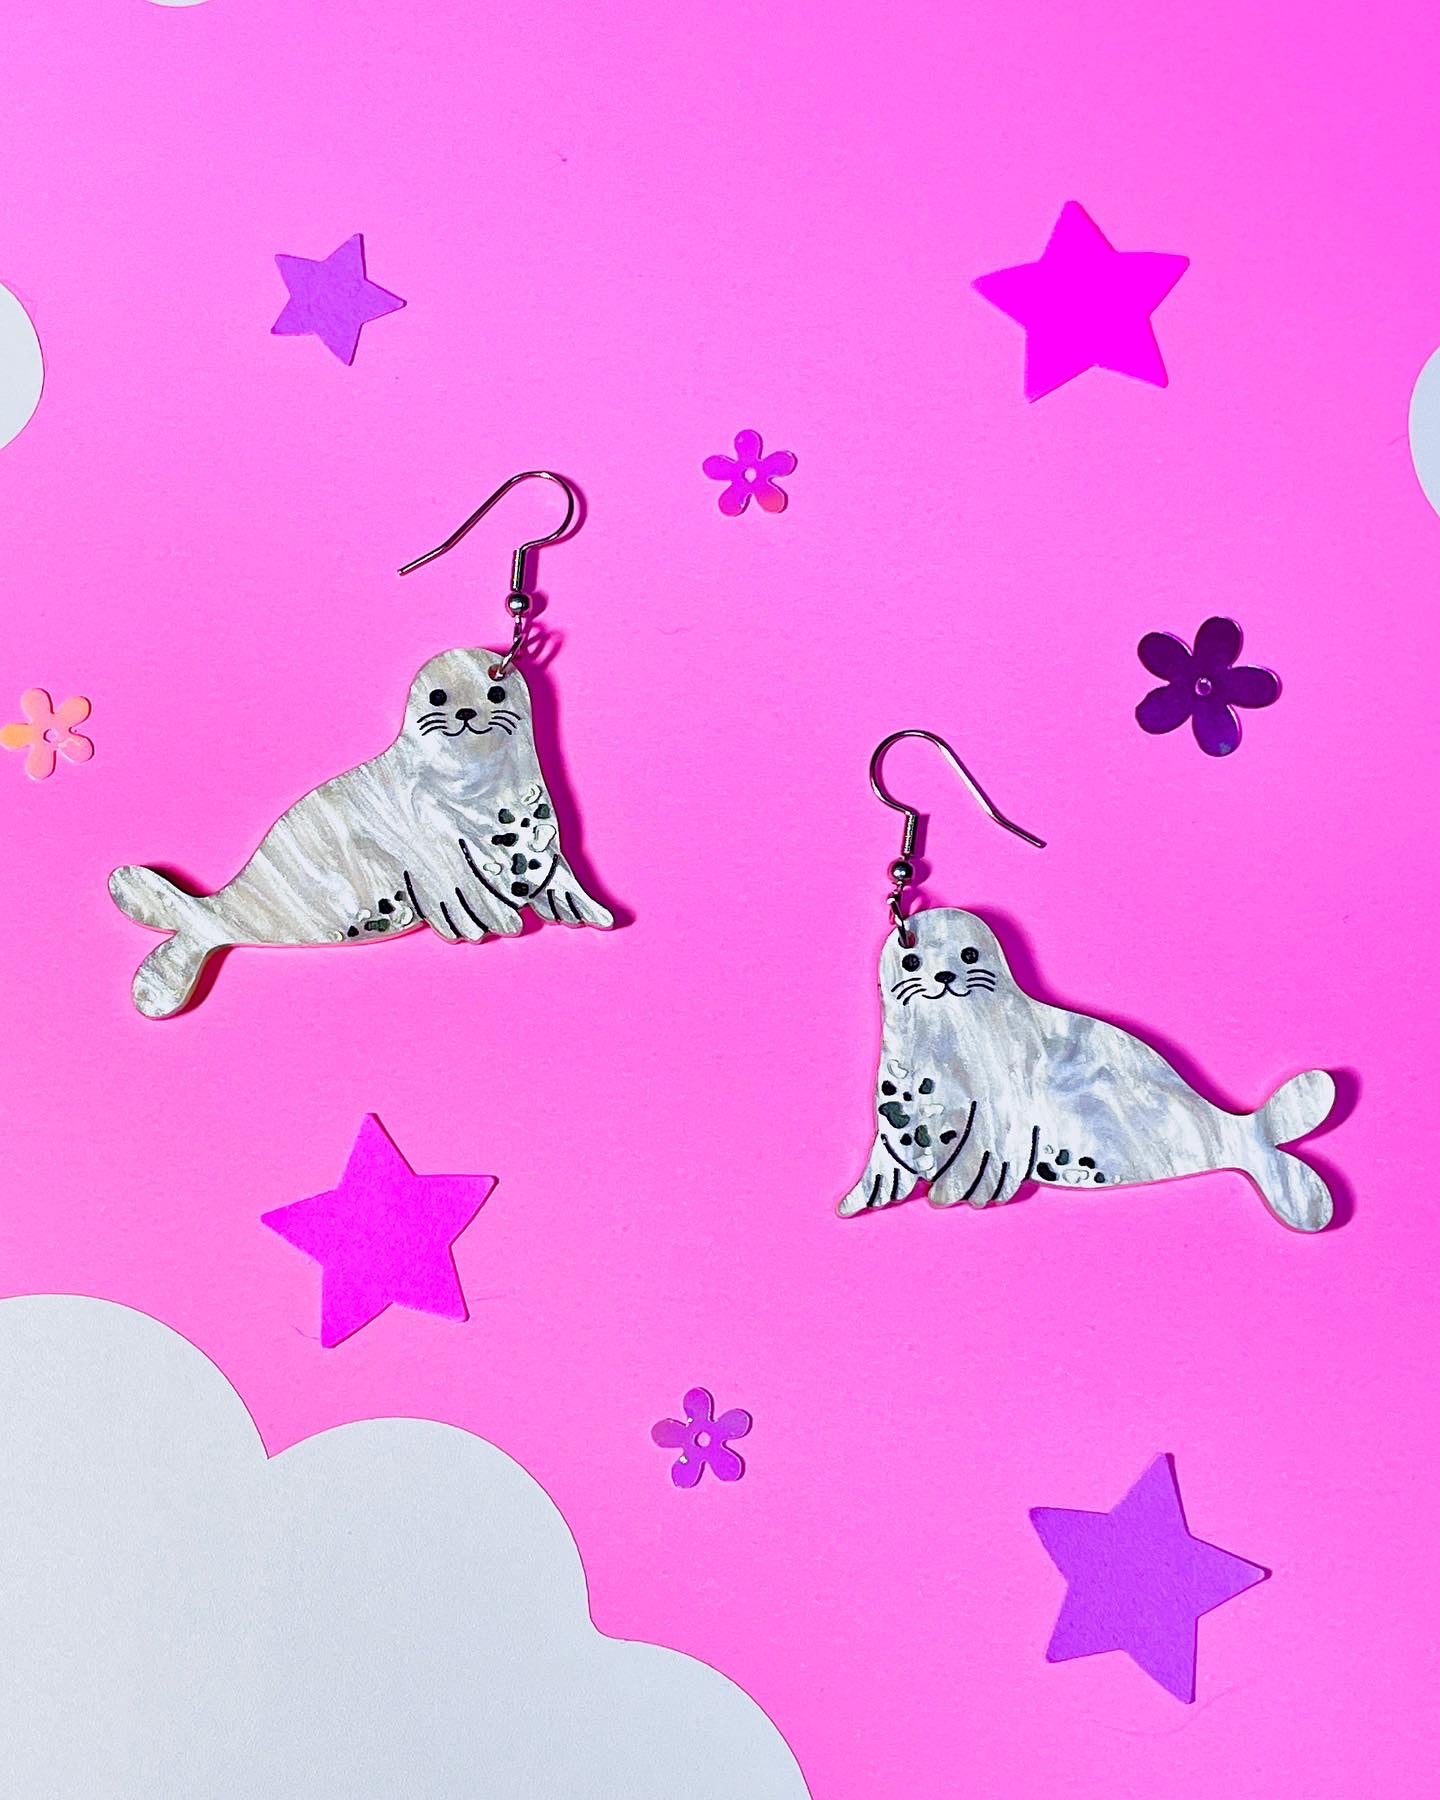 Spotted Seal Acrylic Earrings